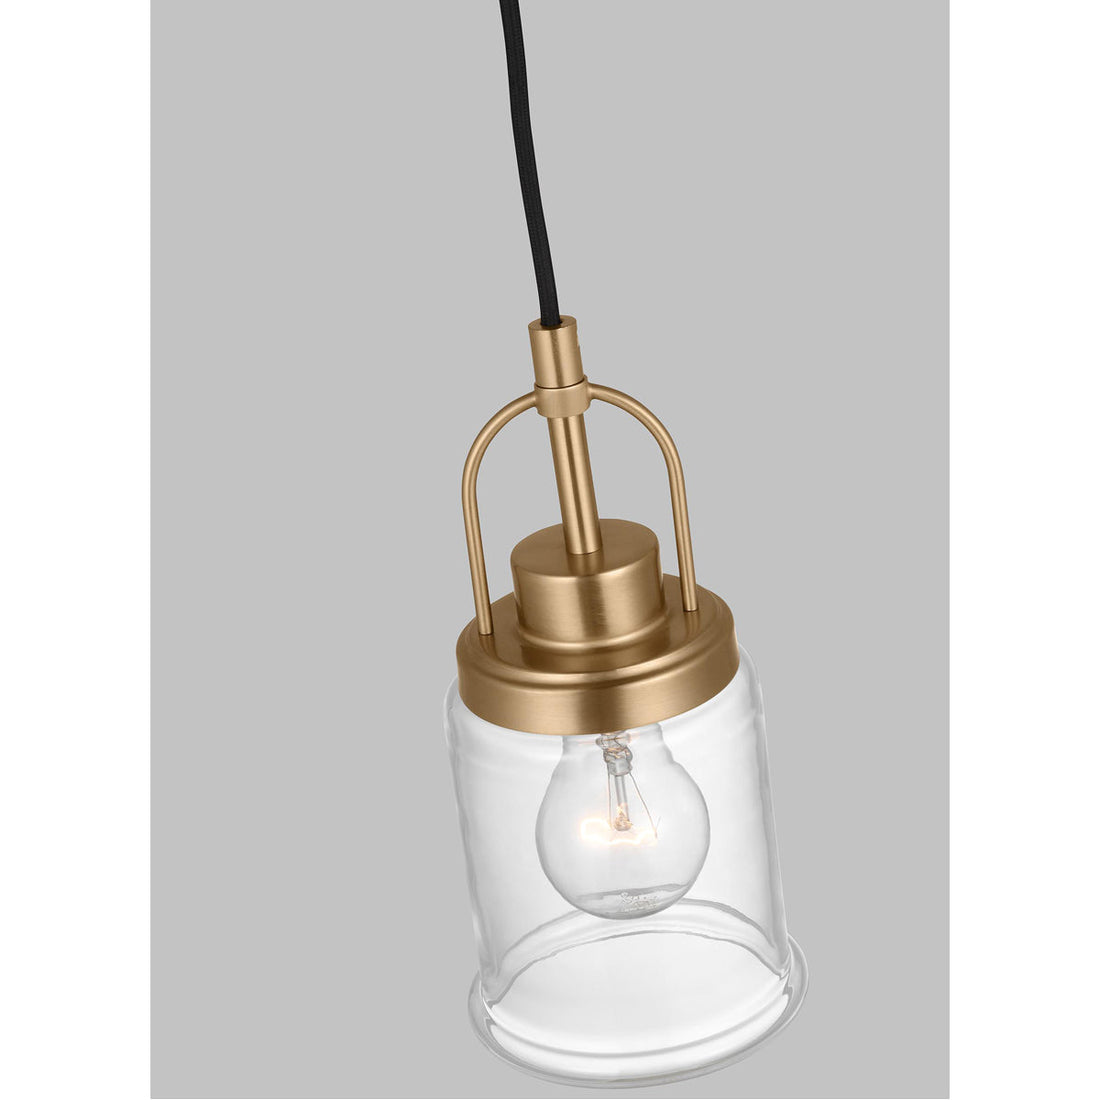 Sea Gull Lighting Anders 1-Light Mini-Pendant without Bulb